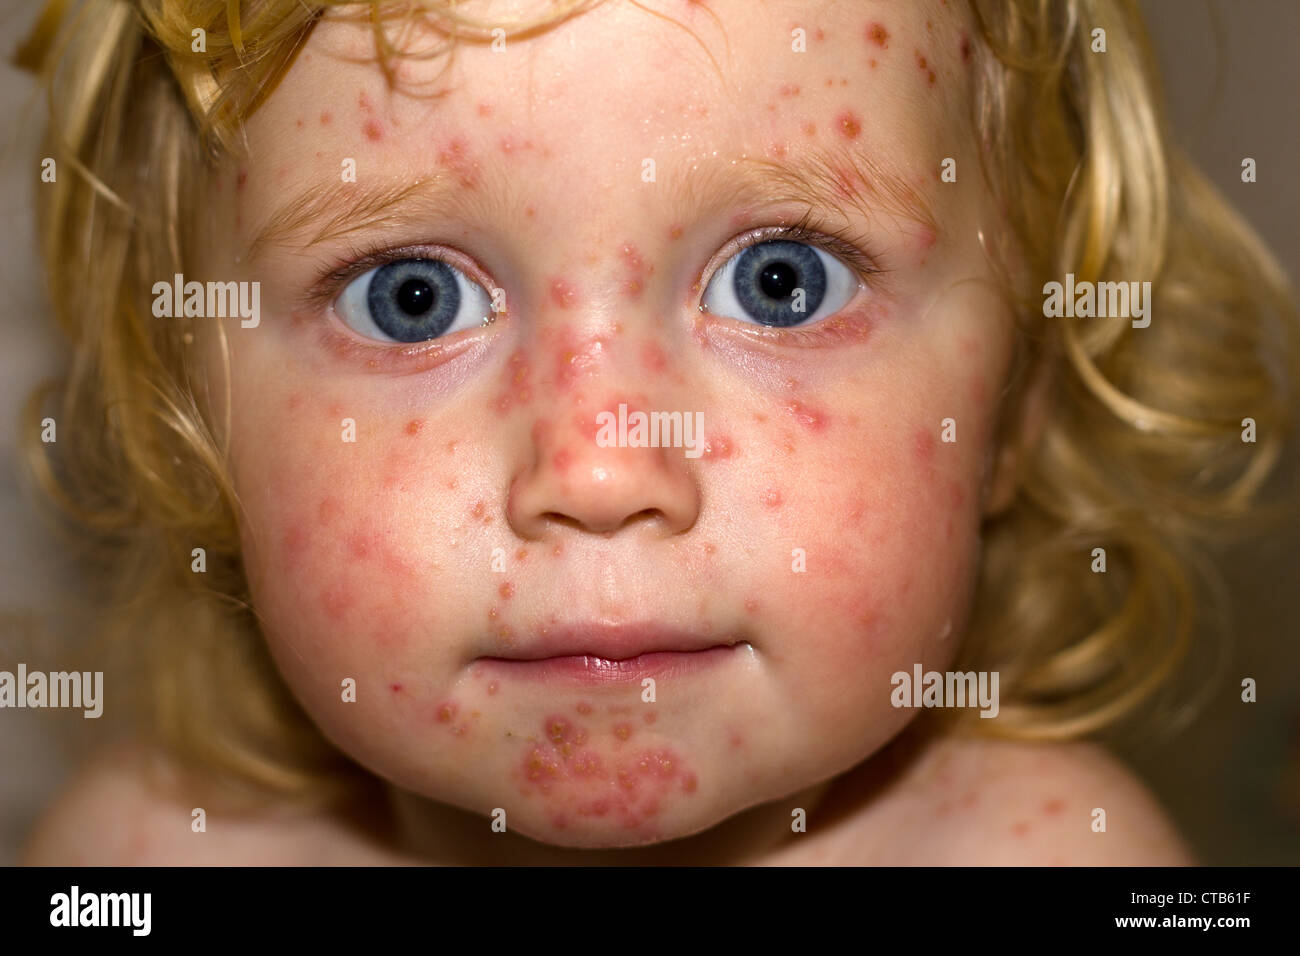 One and a half year old girl suffering with chicken pox 